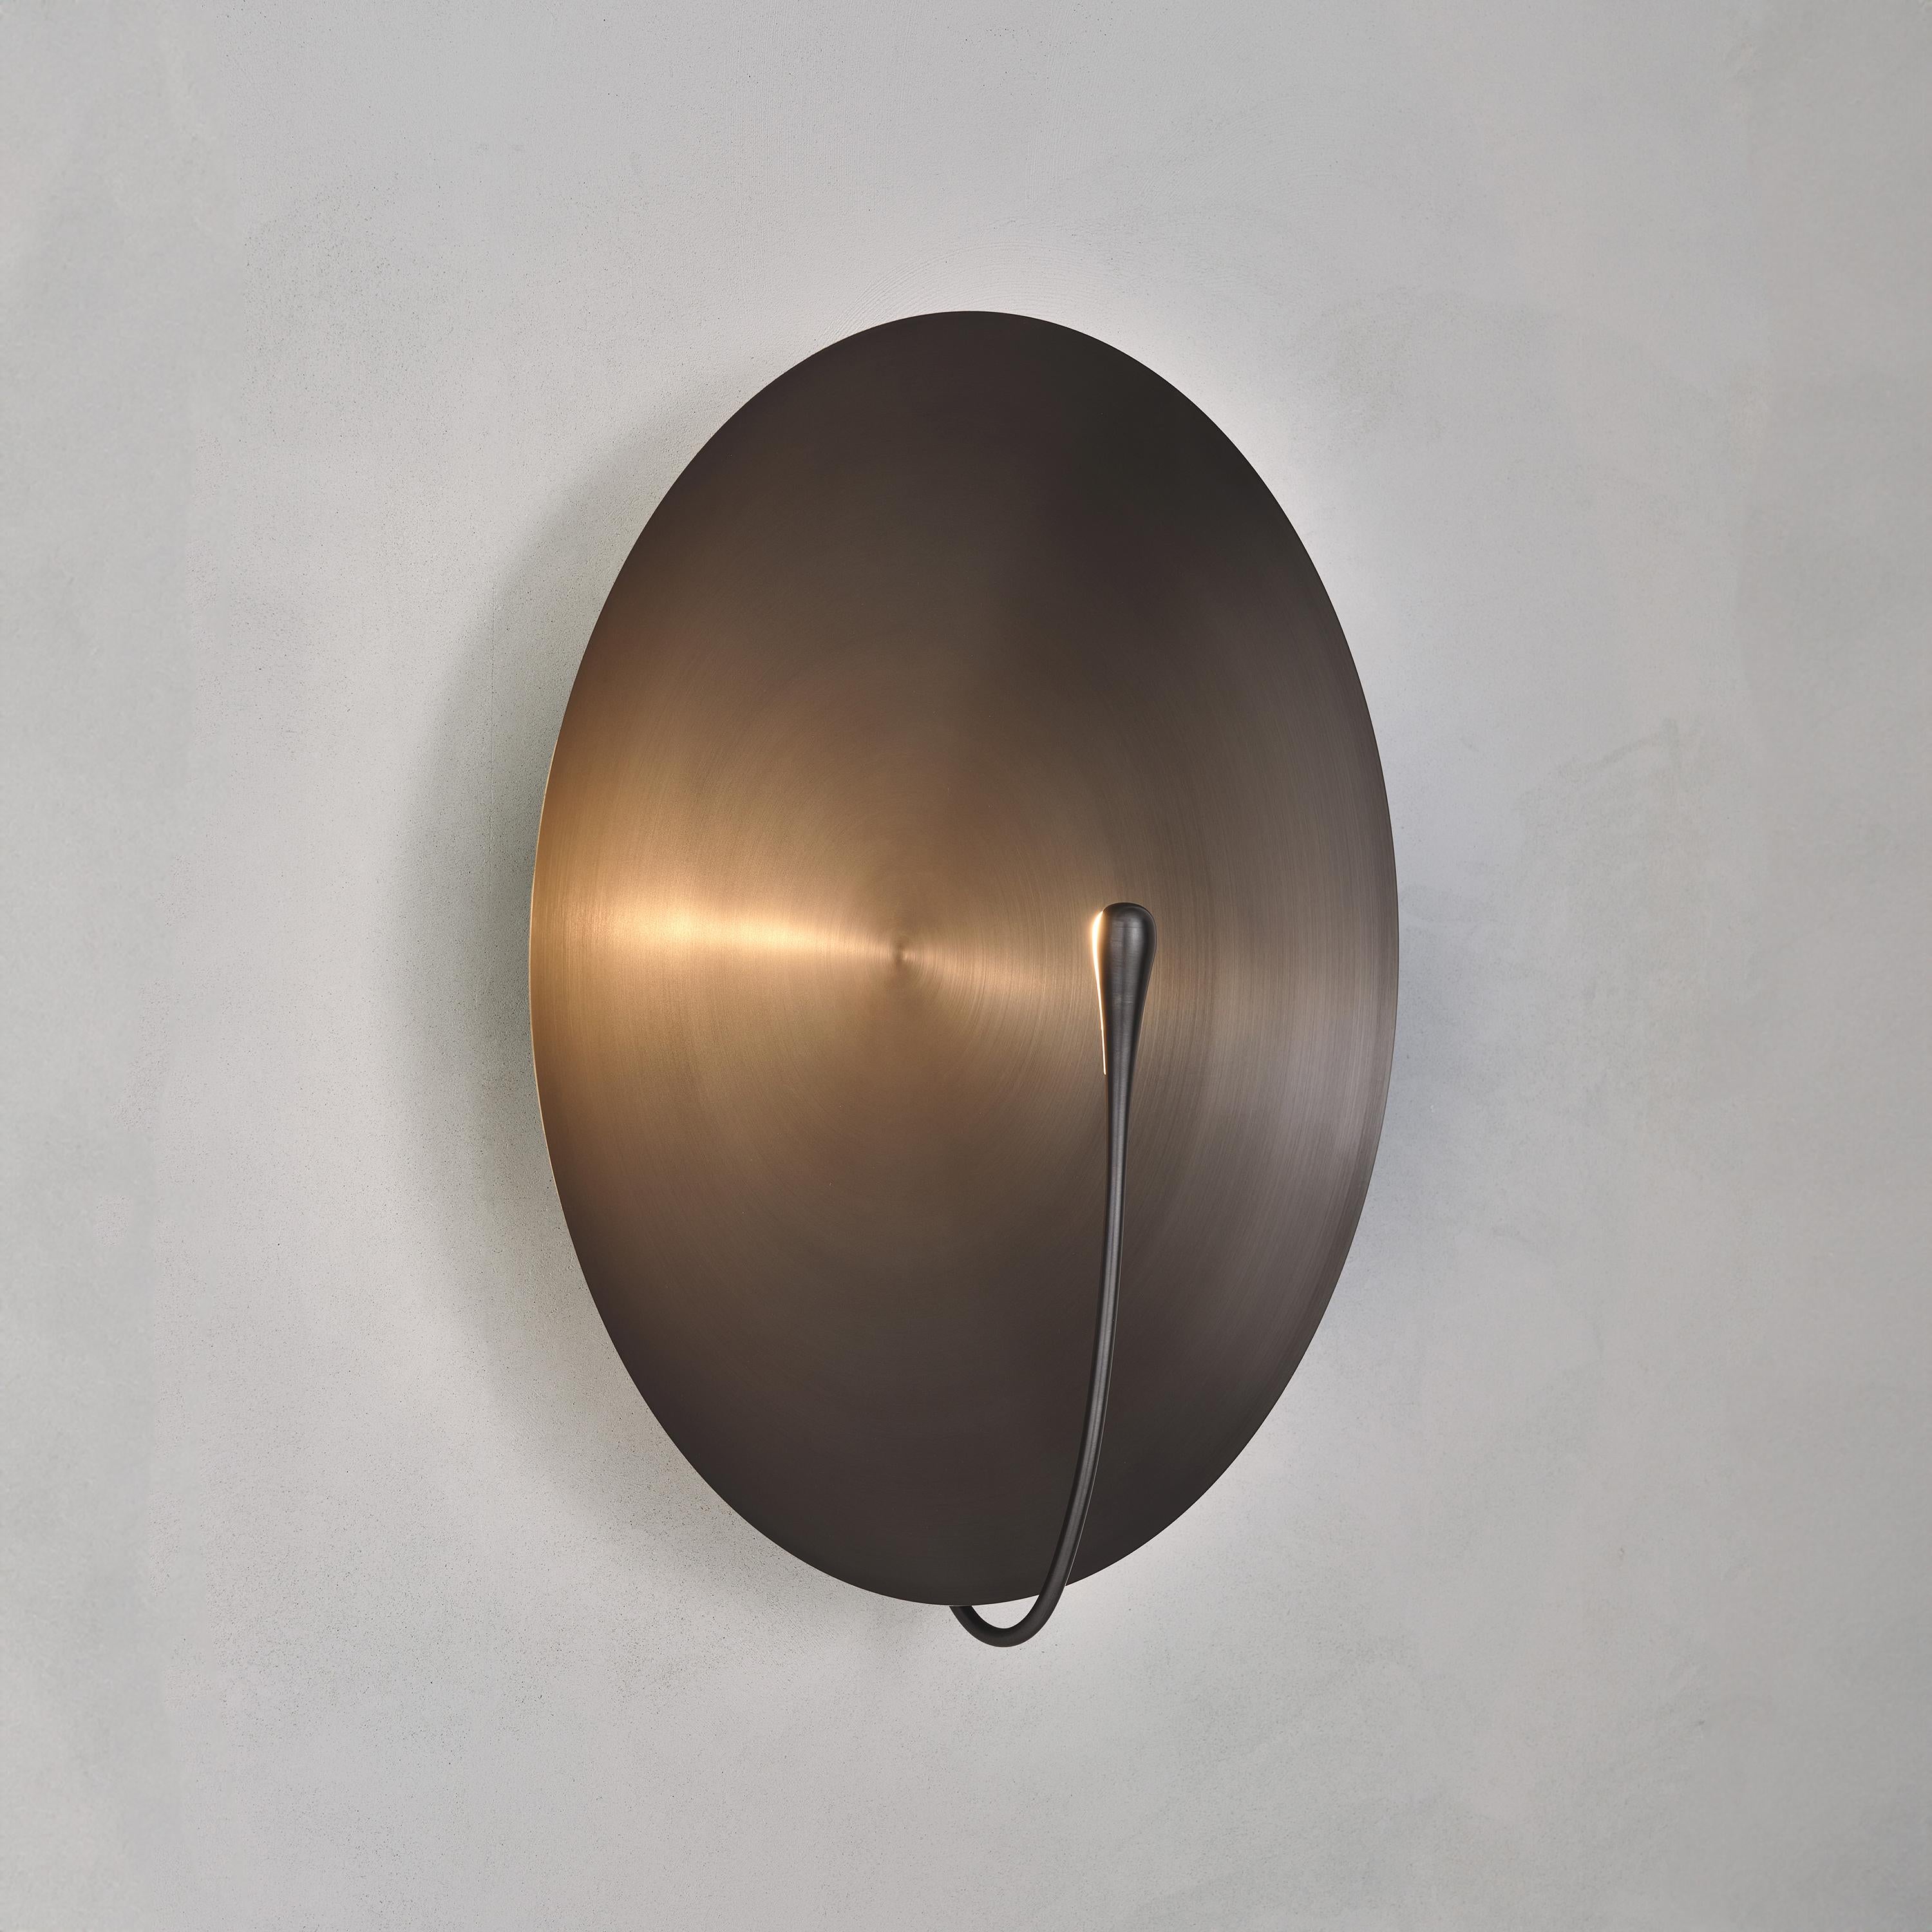 British 'Cosmic Regolith XL' Handmade Patinated Brass Contemporary Wall Light Sconce For Sale